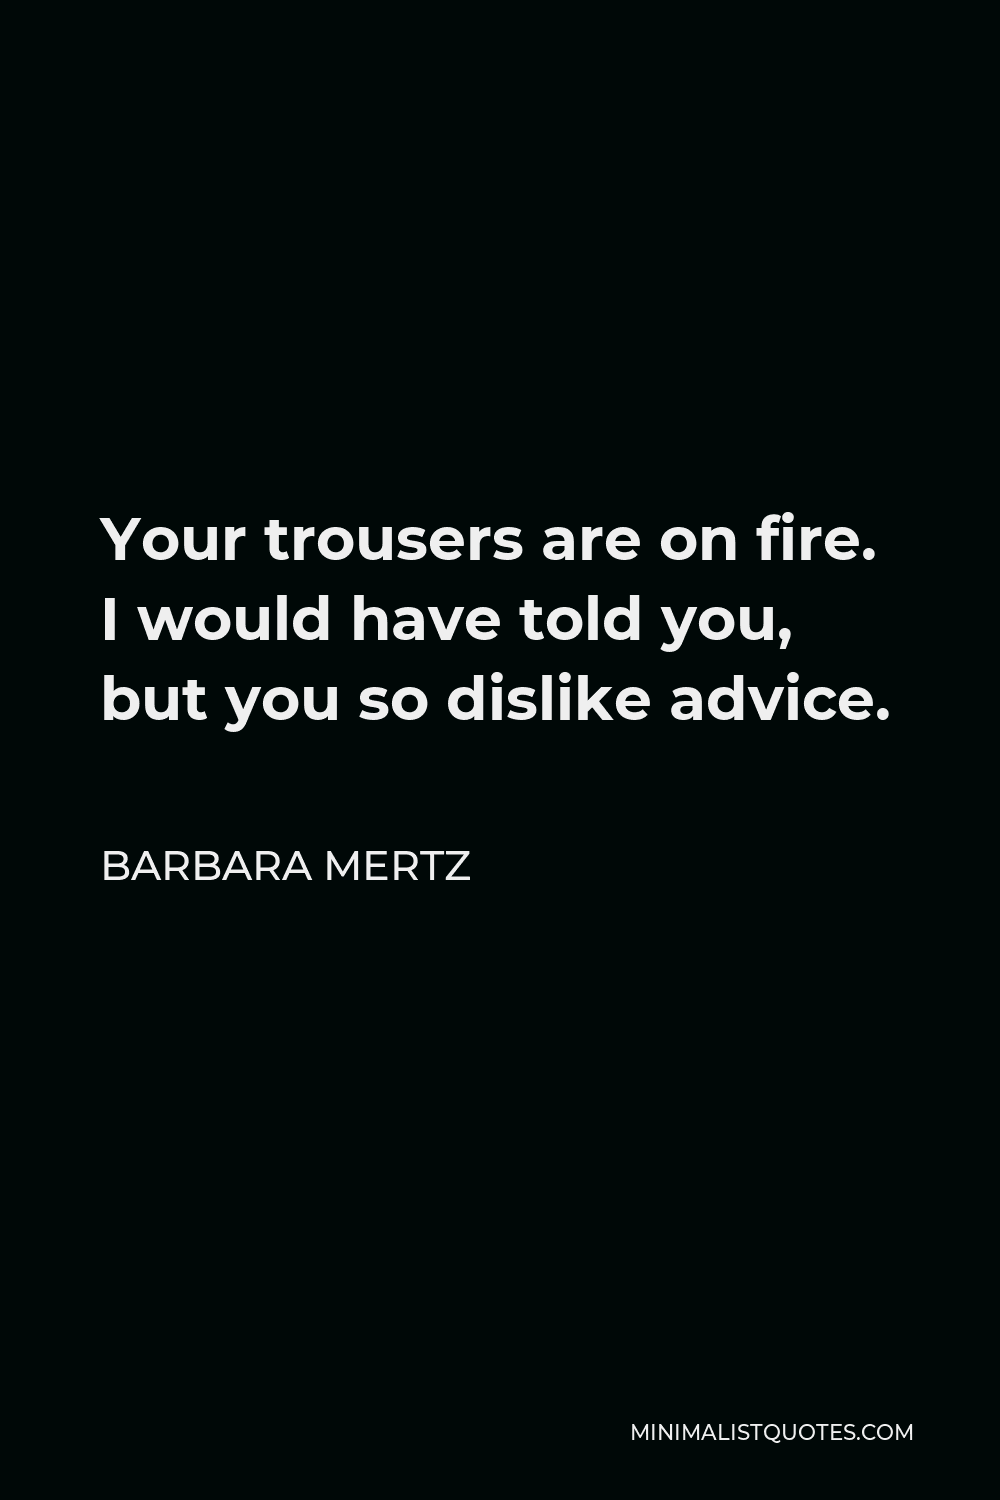 Barbara Mertz Quote - Your trousers are on fire. I would have told you, but you so dislike advice.